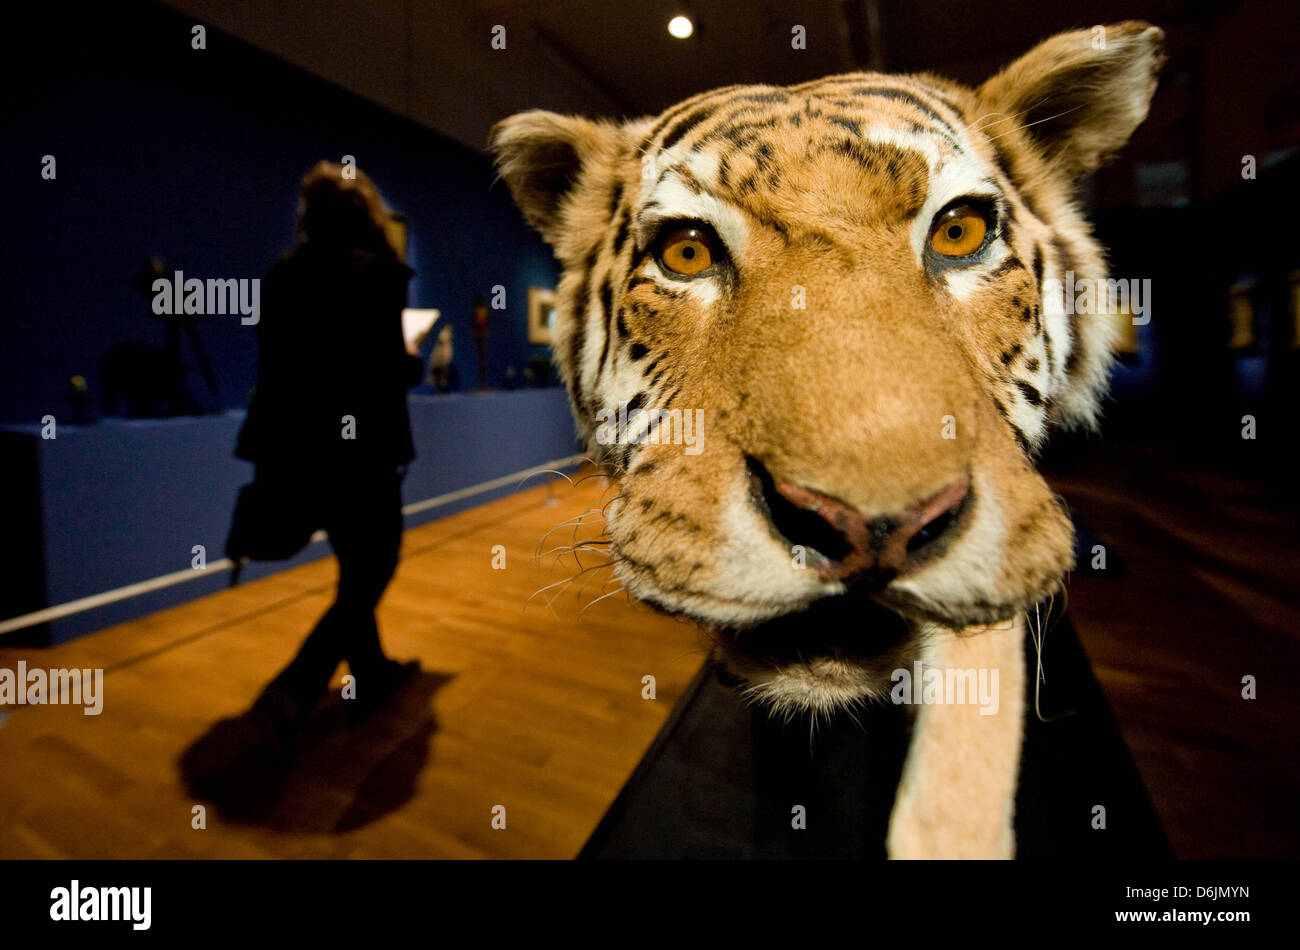 A stuffed Siberian tiger is displayed between paintings at the exhibition 'In the Animal Kingdom' at State Museum in Hanover, Germany, 22 MArch 2012. Stuffed wild cats, pigs and parrots are juxtaposed with paintings members of the same speices from the Middle Ages to today. Photo: Peter Steffen Stock Photo